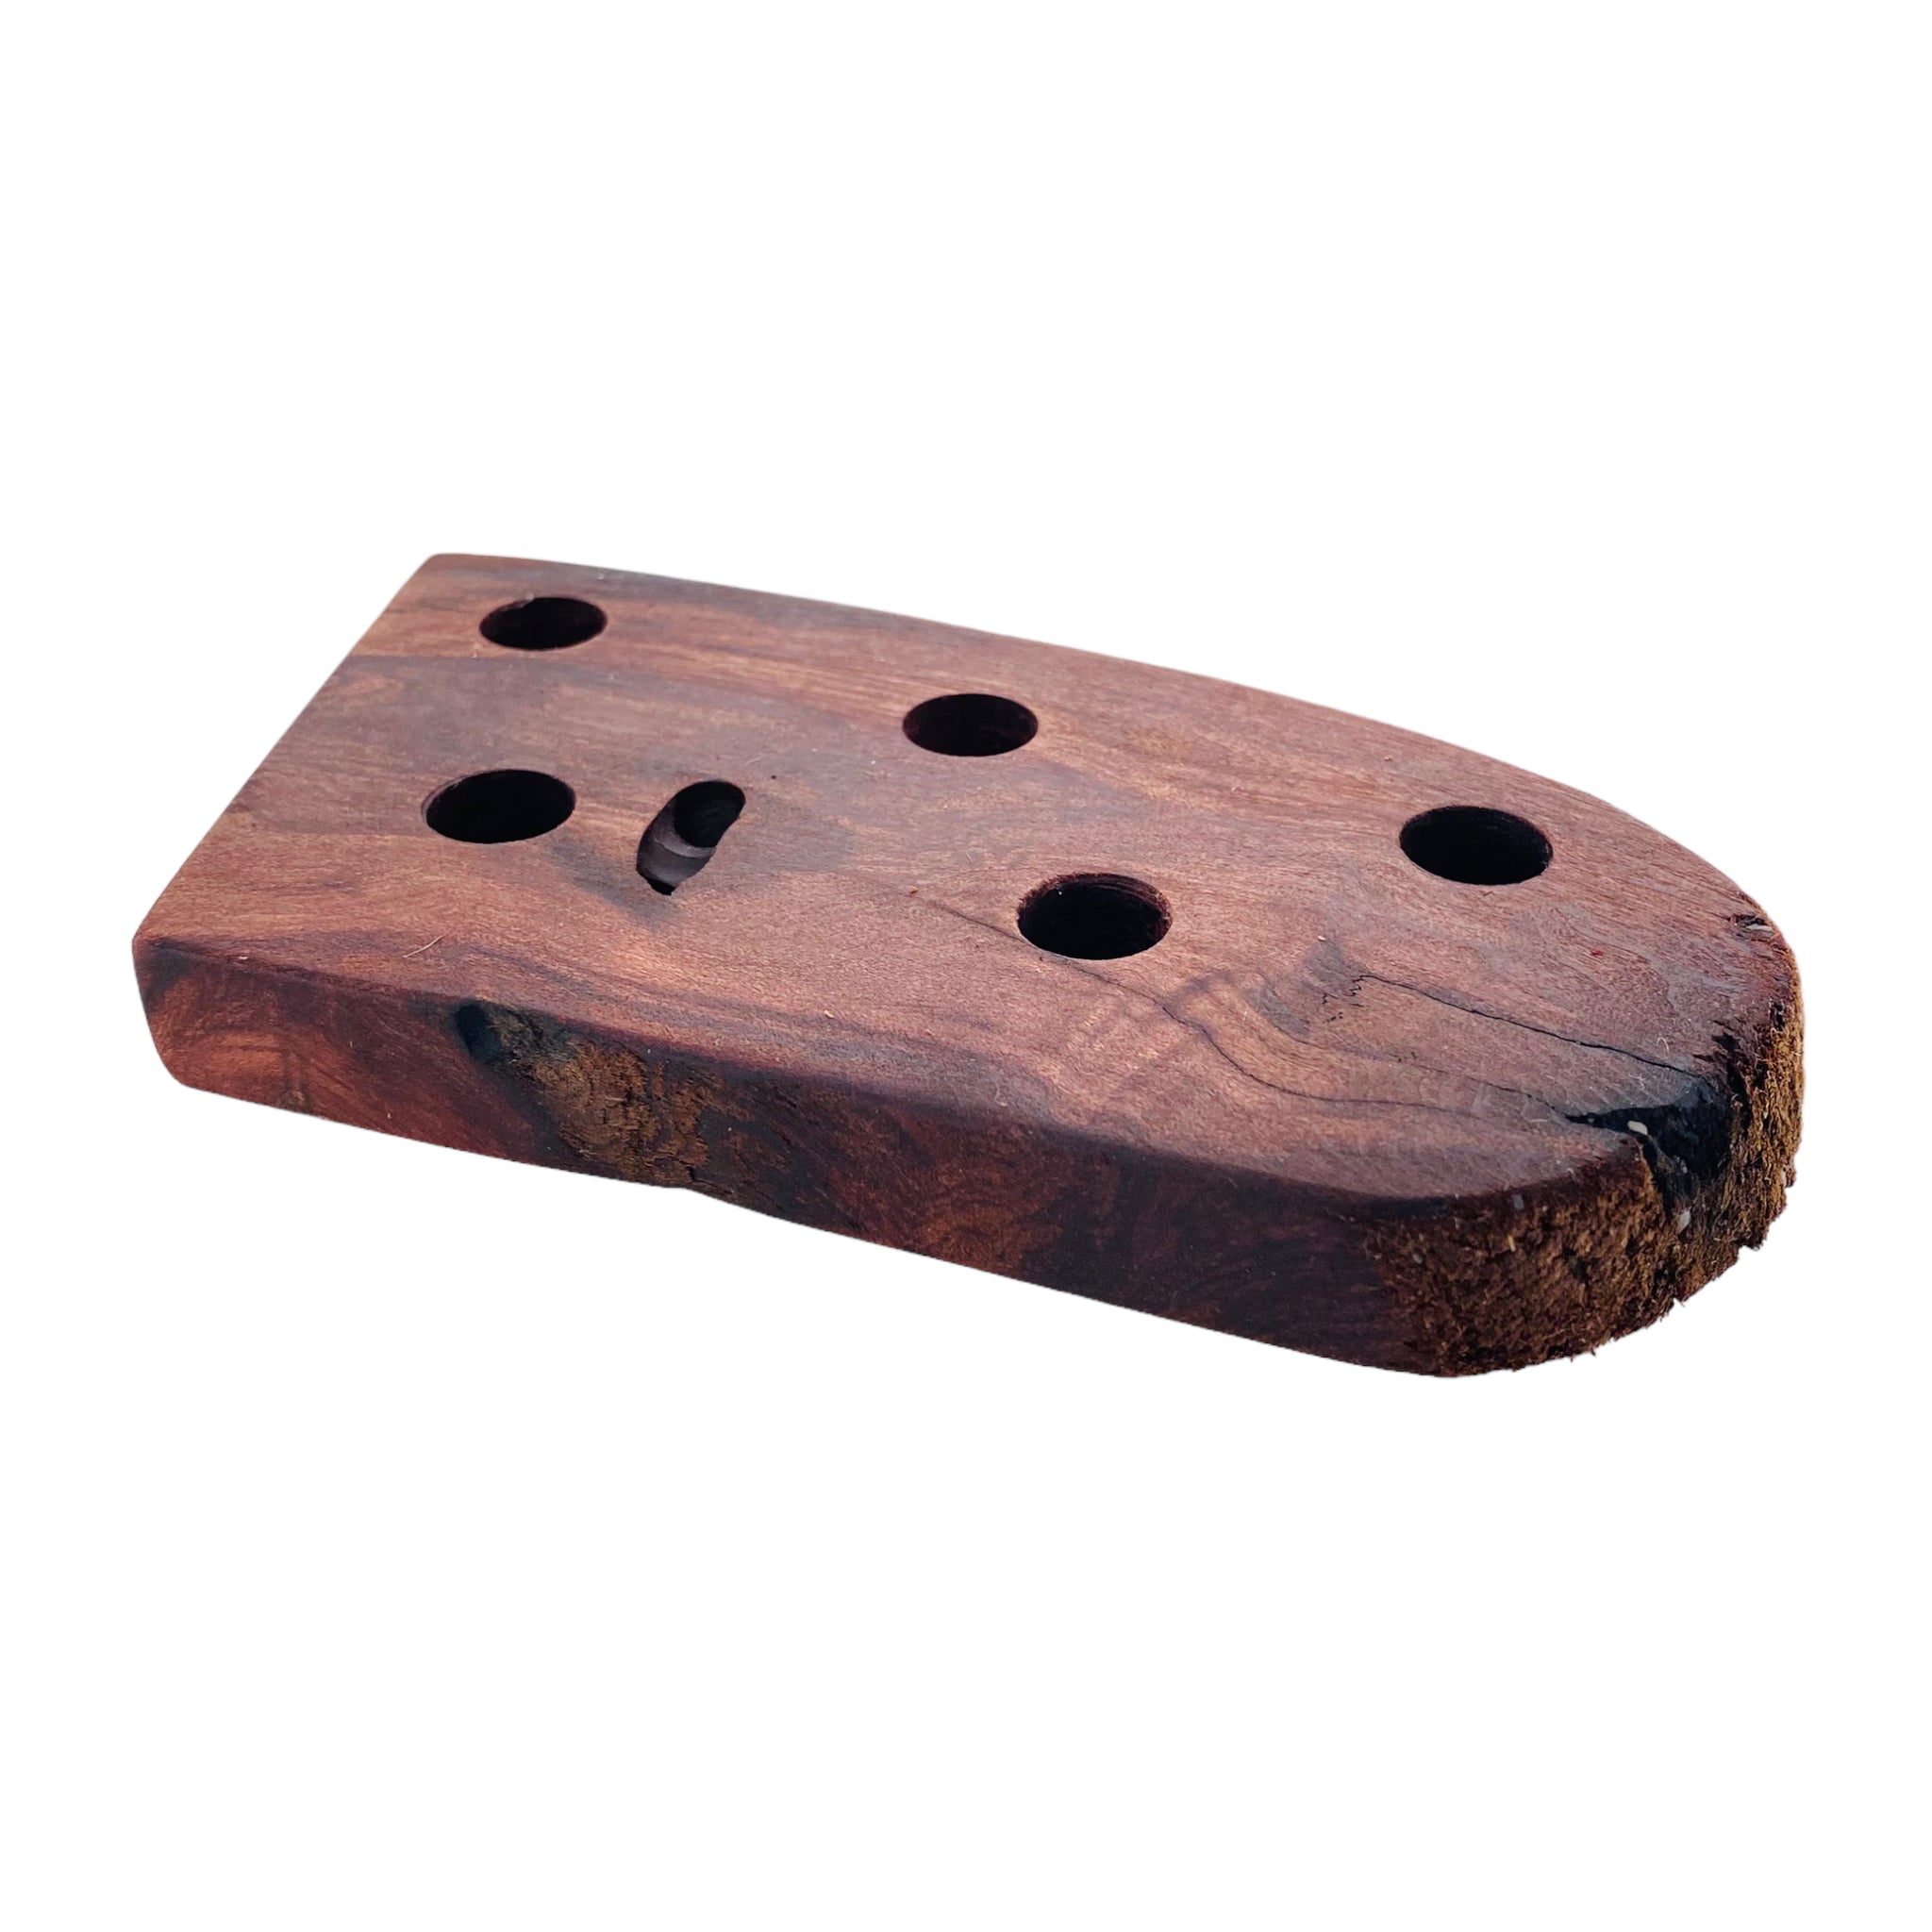 5 Hole Wood Display Stand Holder For 14mm Bong Bowl Pieces Or Quartz Bangers - Red Wood Burl With Live Edge